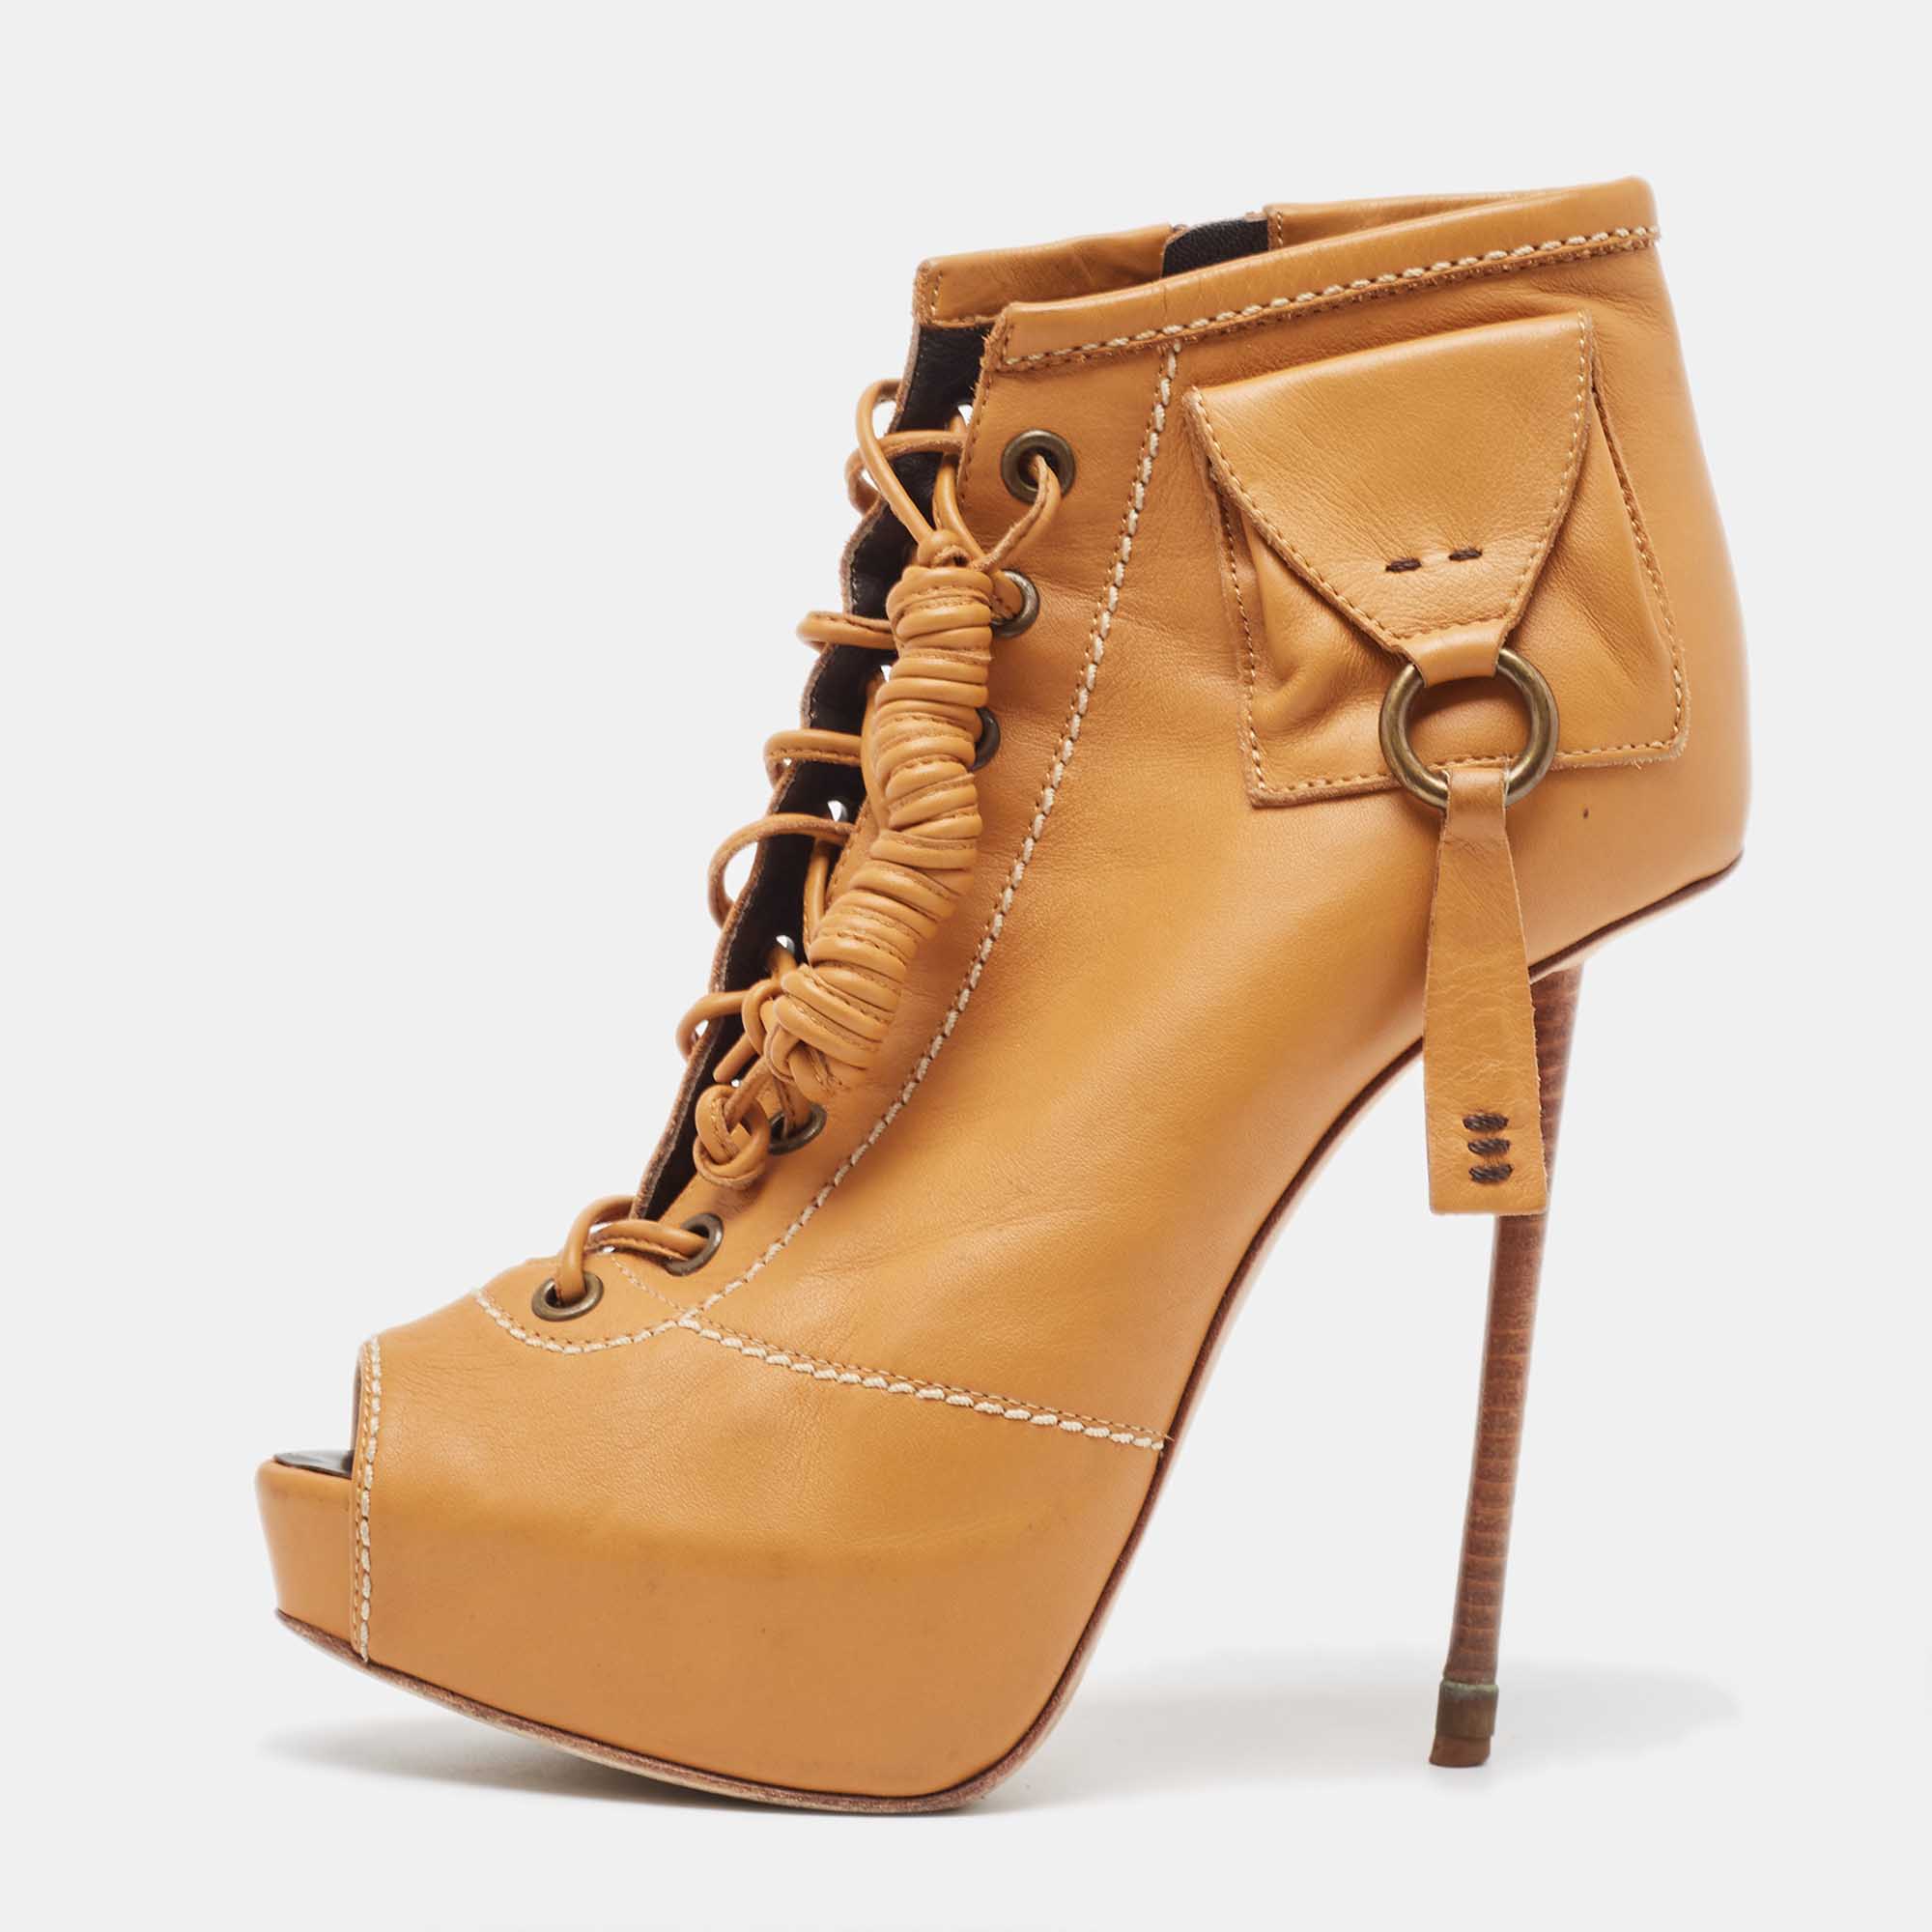 Giuseppe zanotti light brown leather peep toe lace up ankle boots size 36